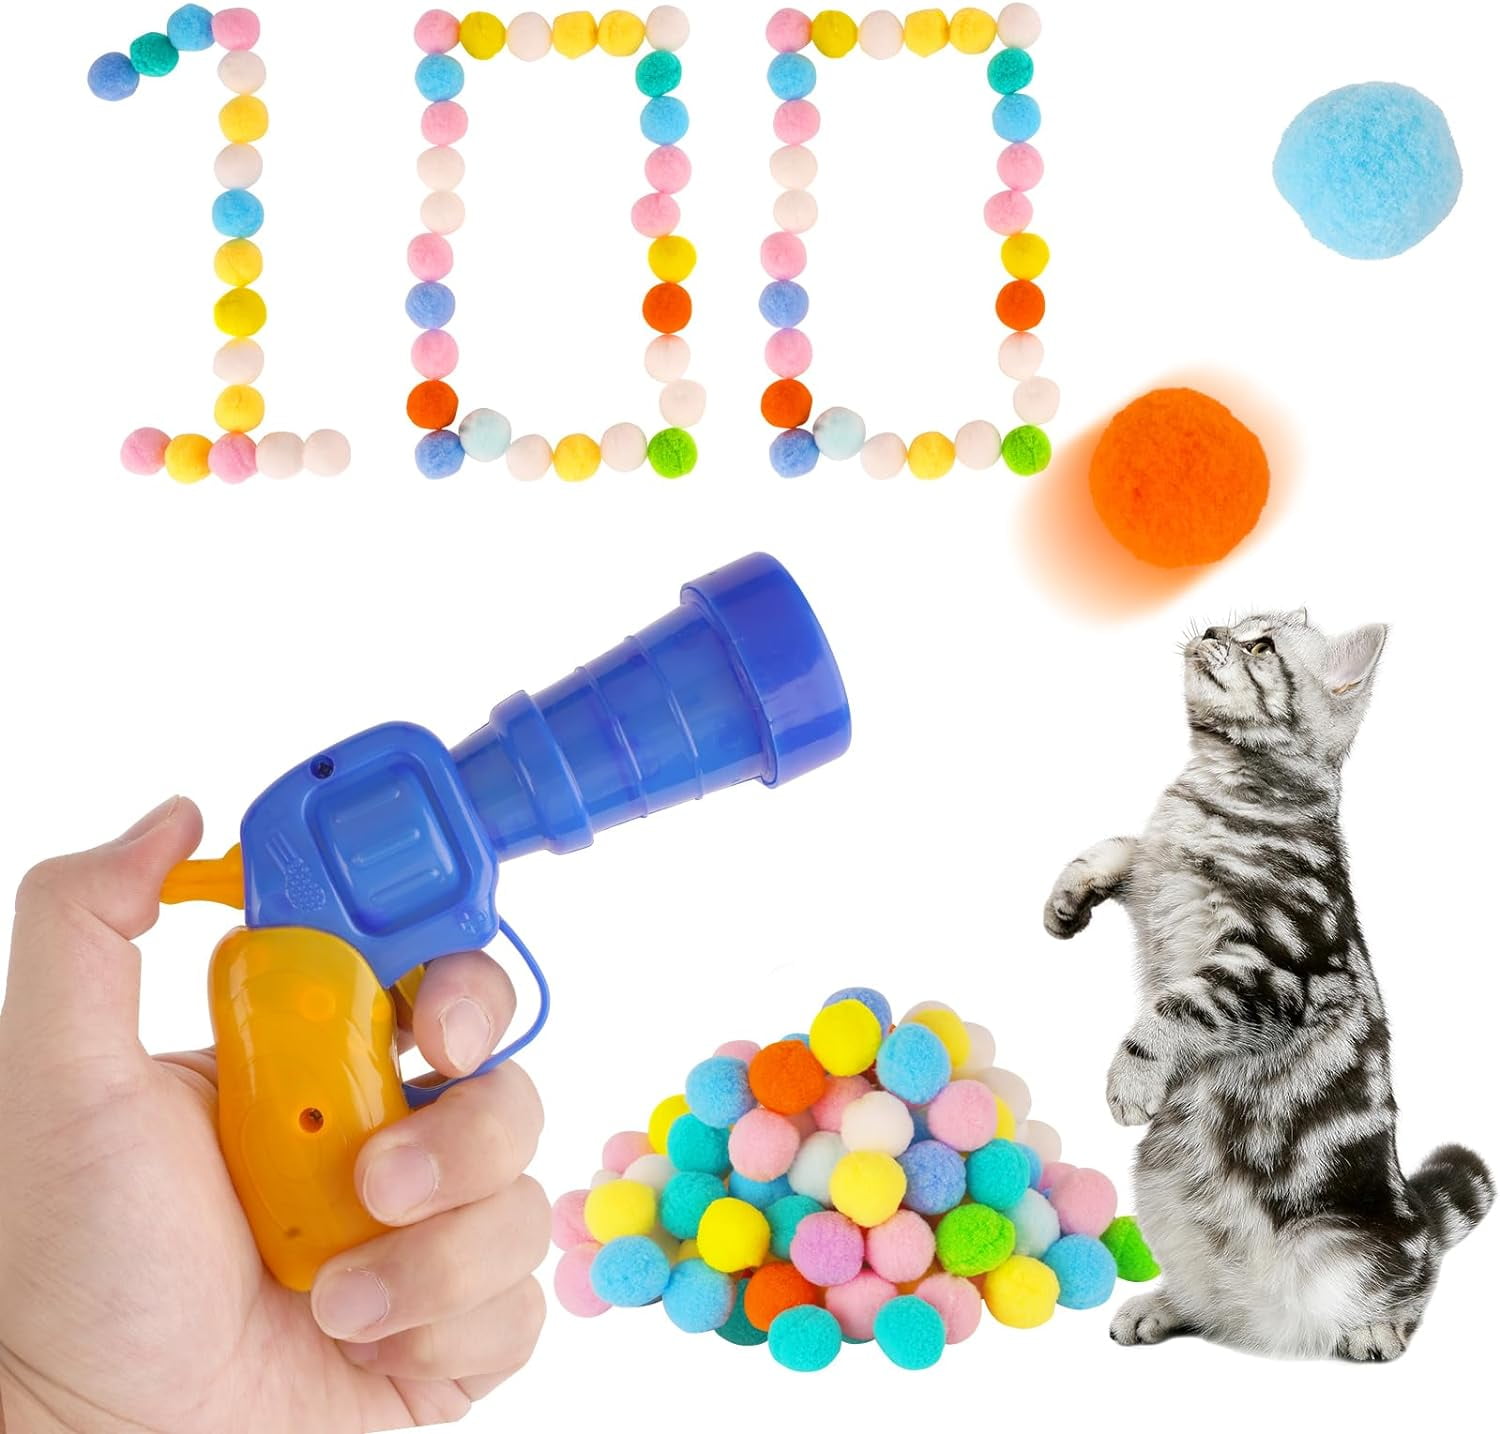 OUDDODU Cat Toys Balls with Launcher,Interactive Fuzzy Soft Balls with 100  Pcs Colorful Cat Pom Pom Balls,Silent Toy and DIY Fun for Indoor Cats,Bite  Resistant and Best Gift for Cats. - Yahoo